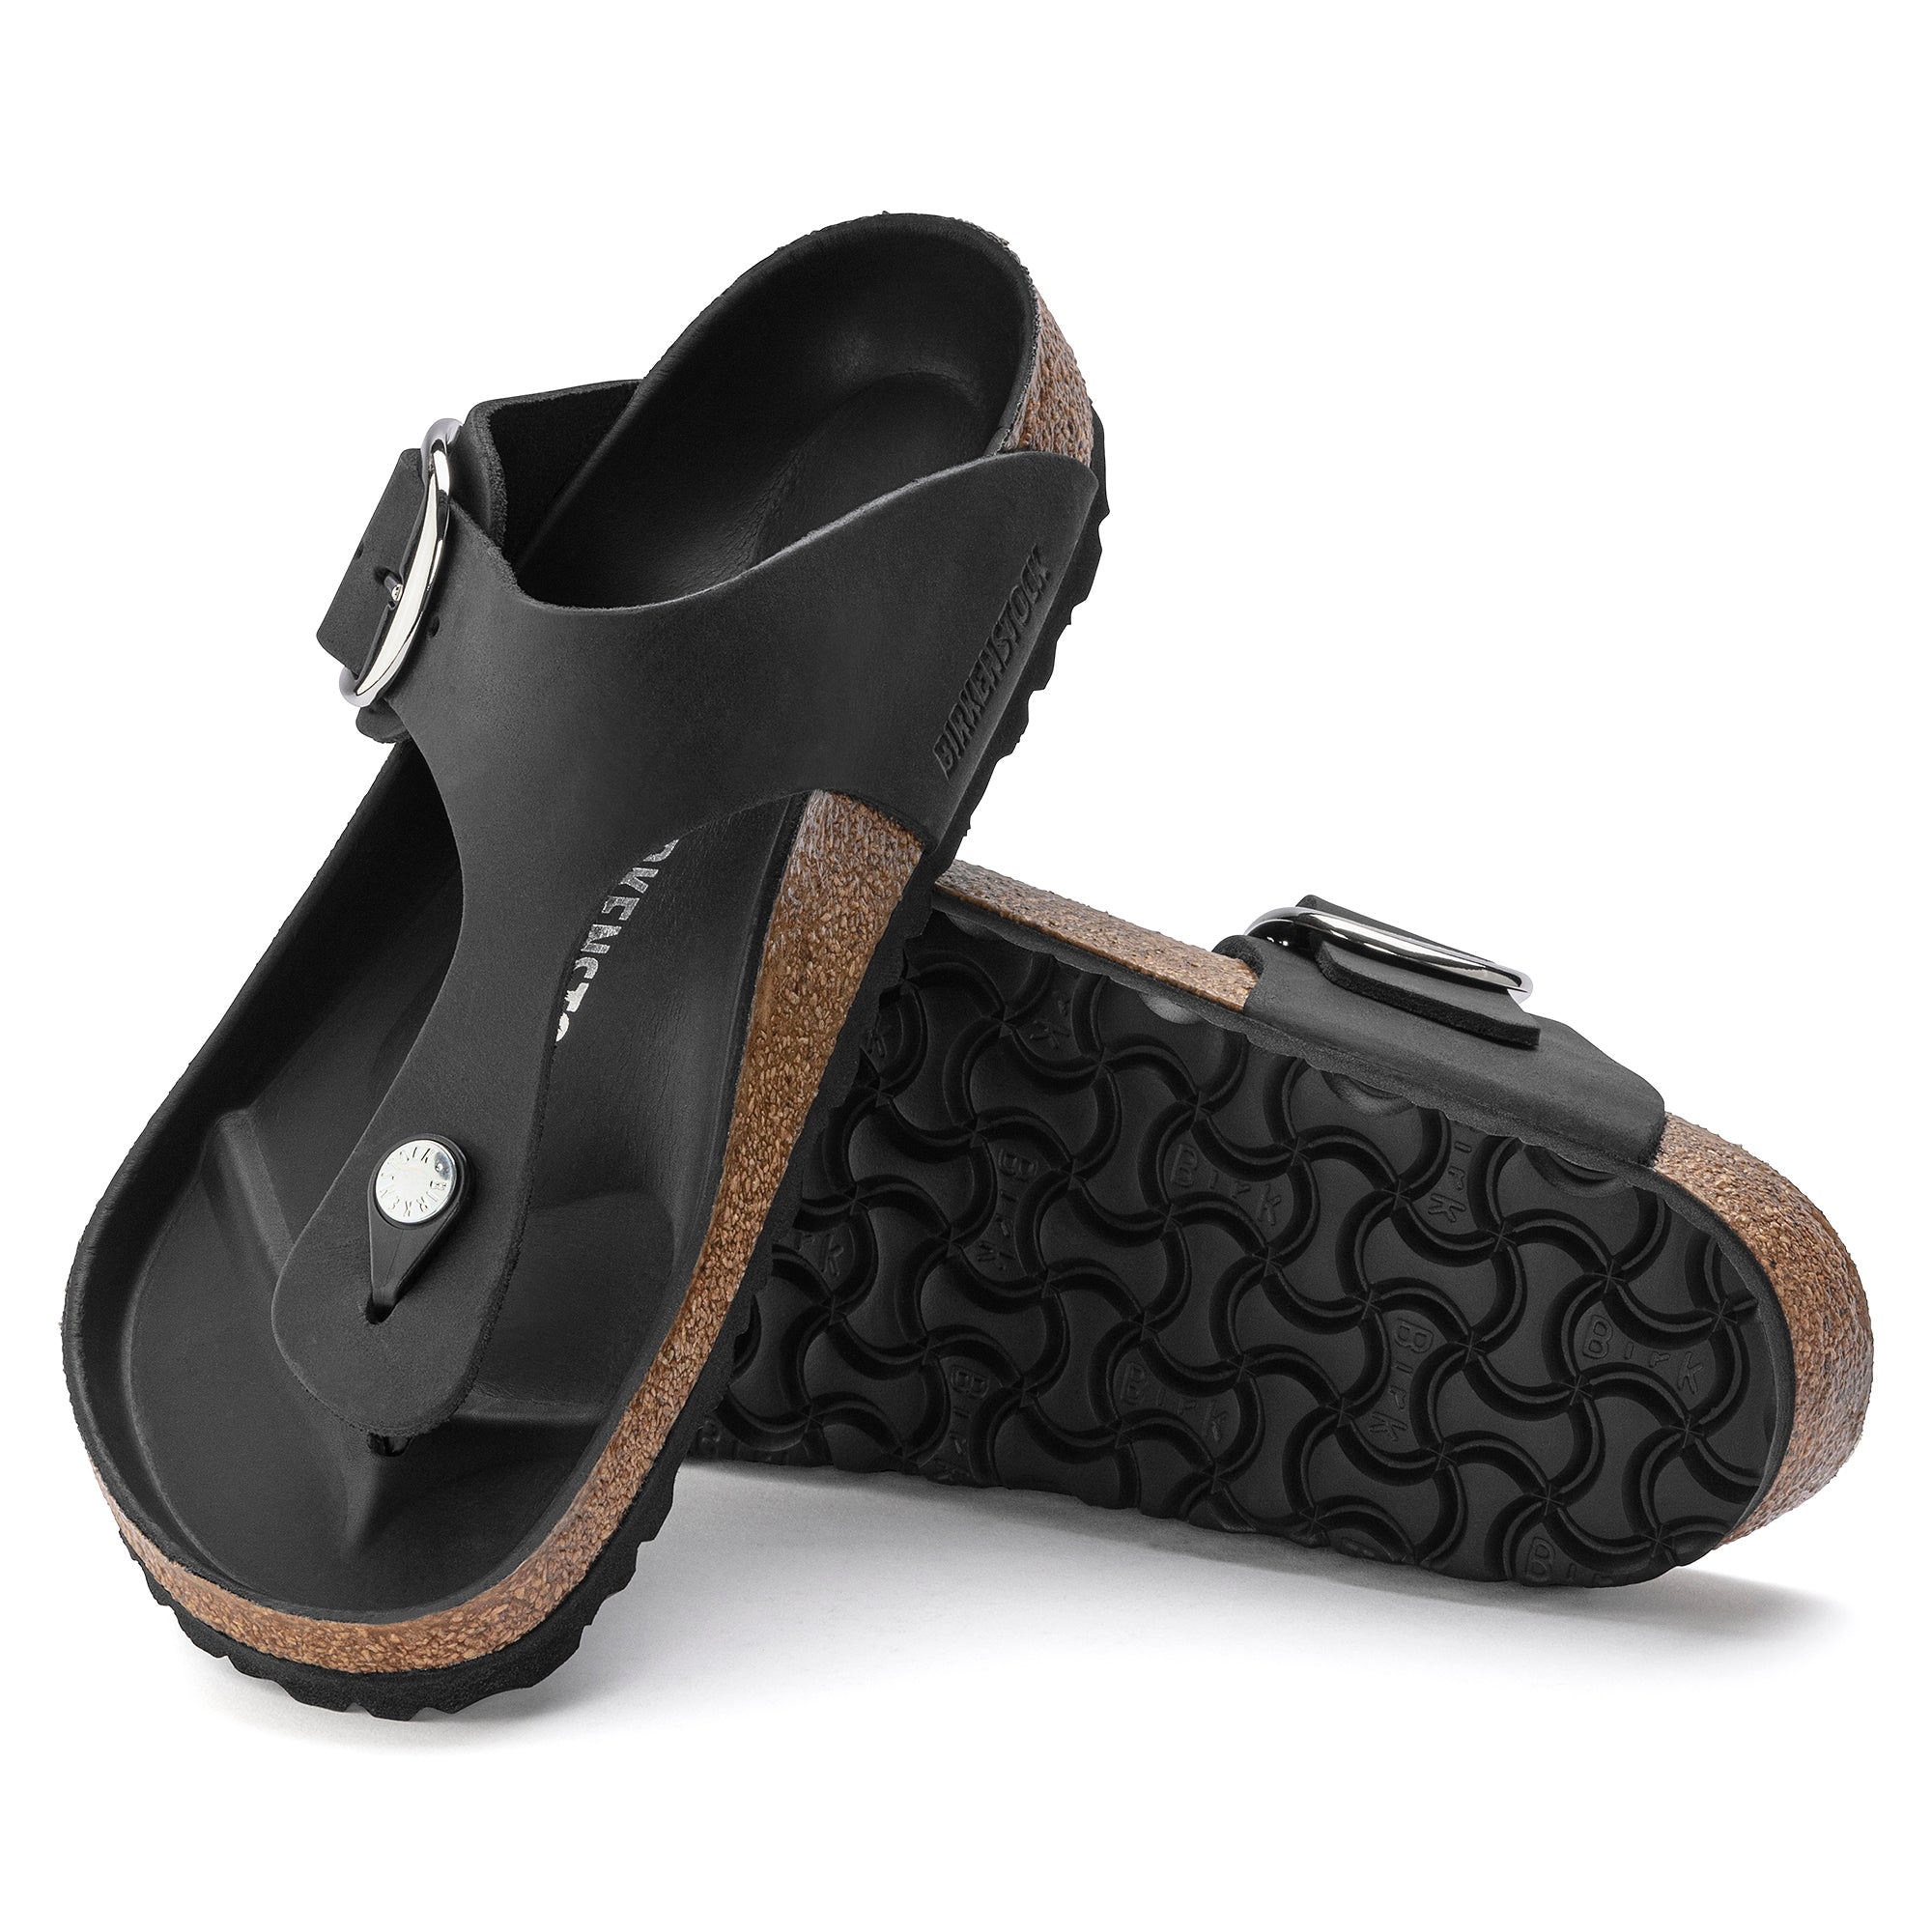 Birkenstock Limited Edition Gizeh Big Buckle black oiled leather